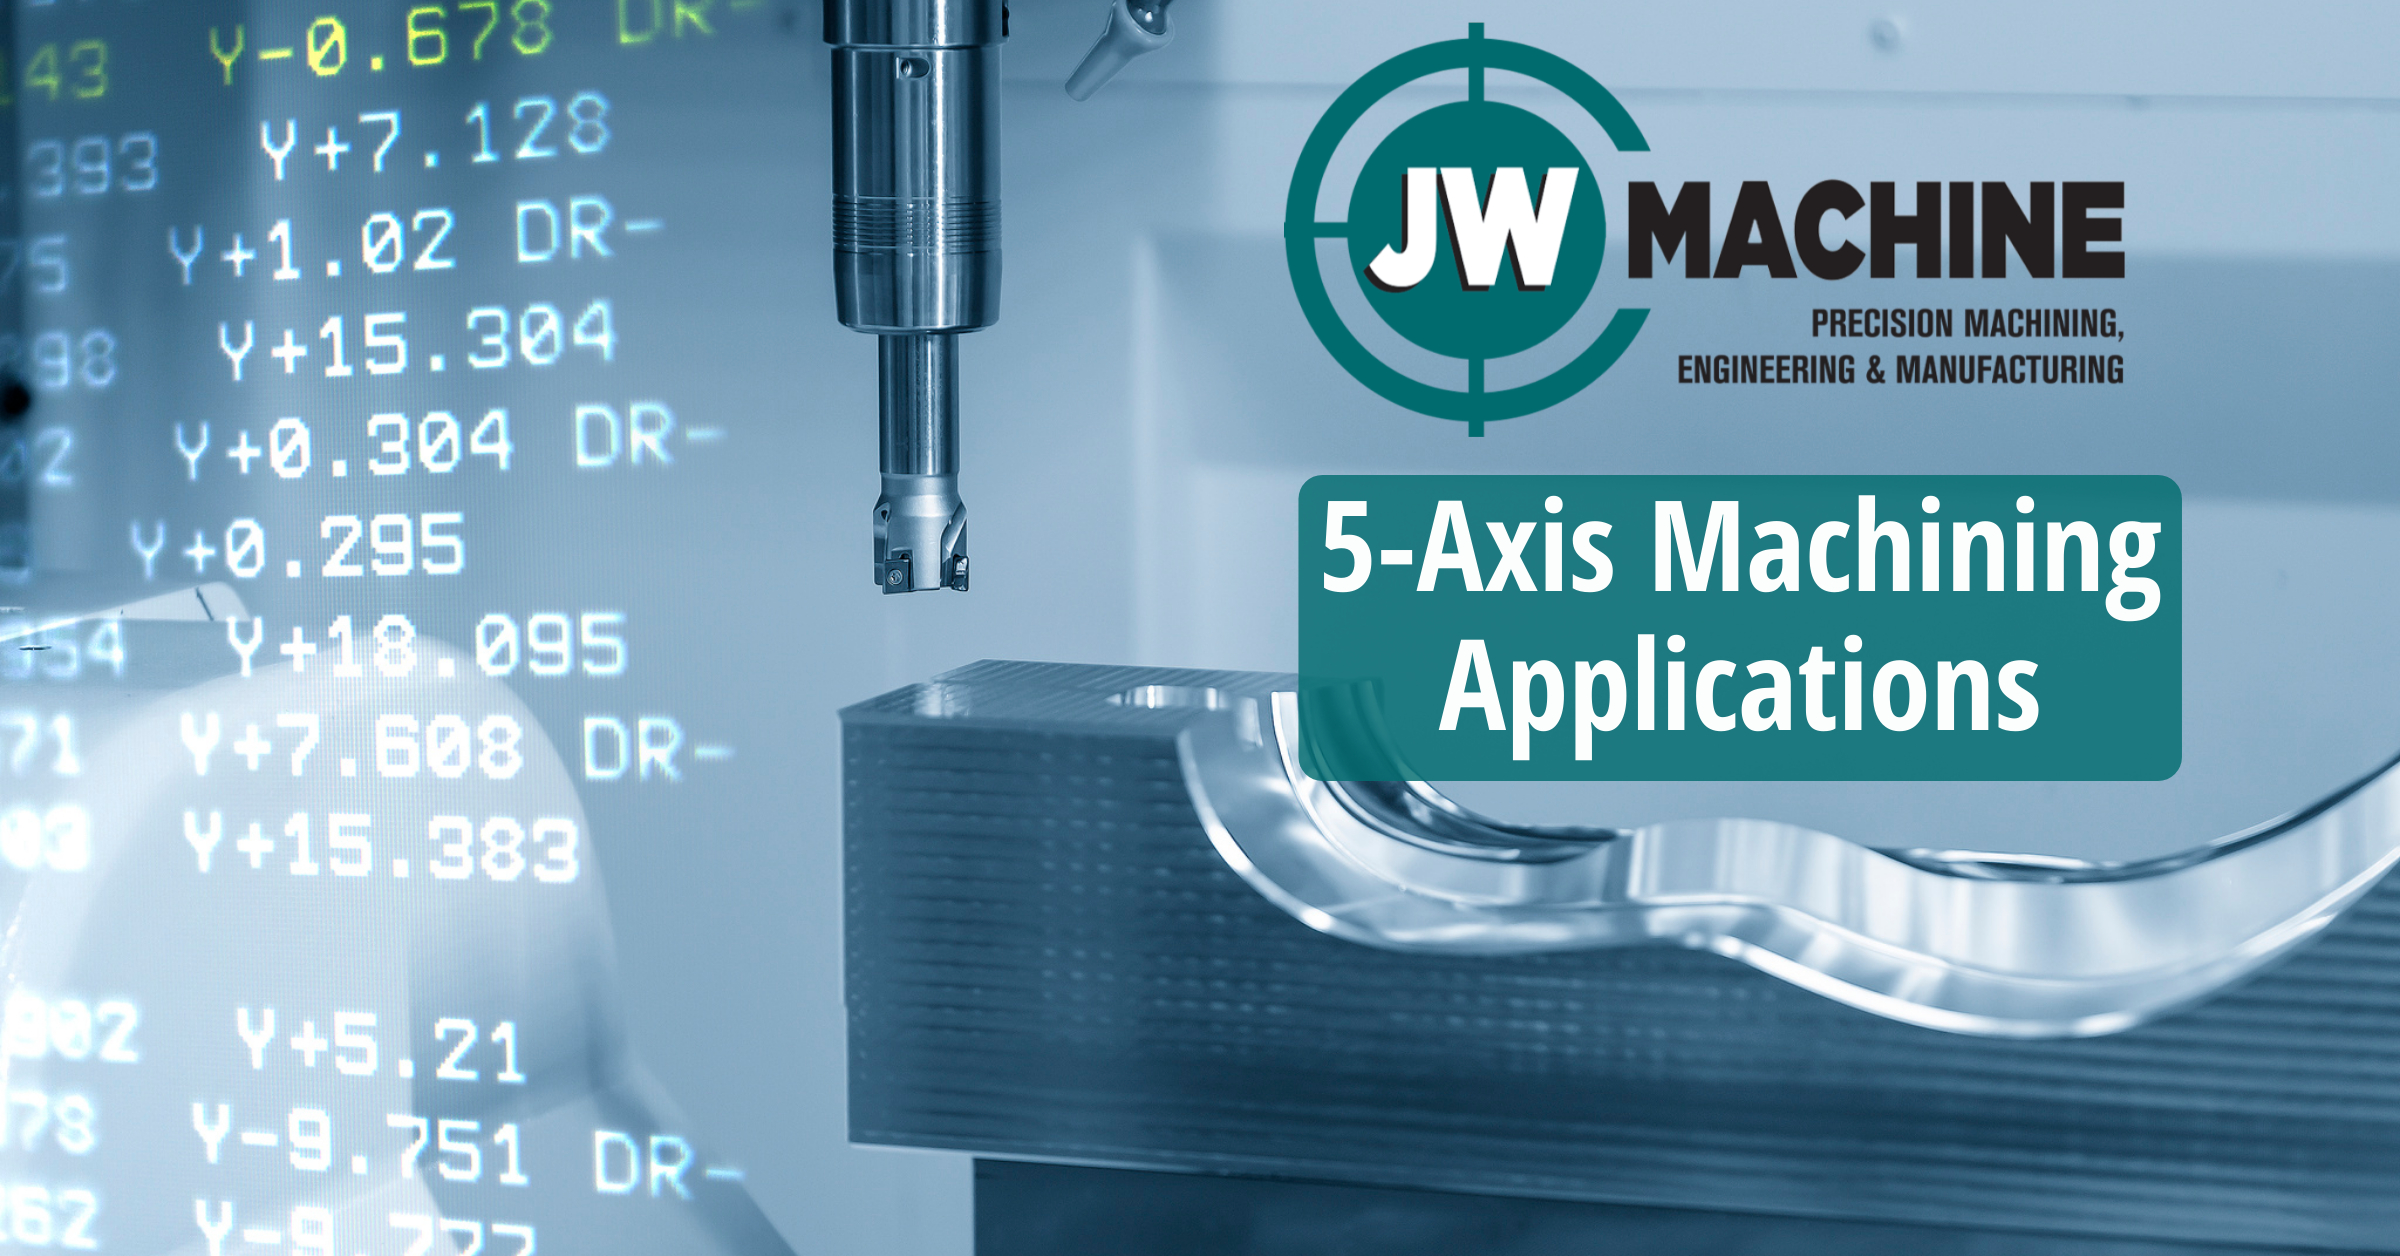 5-Axis Machining Applications